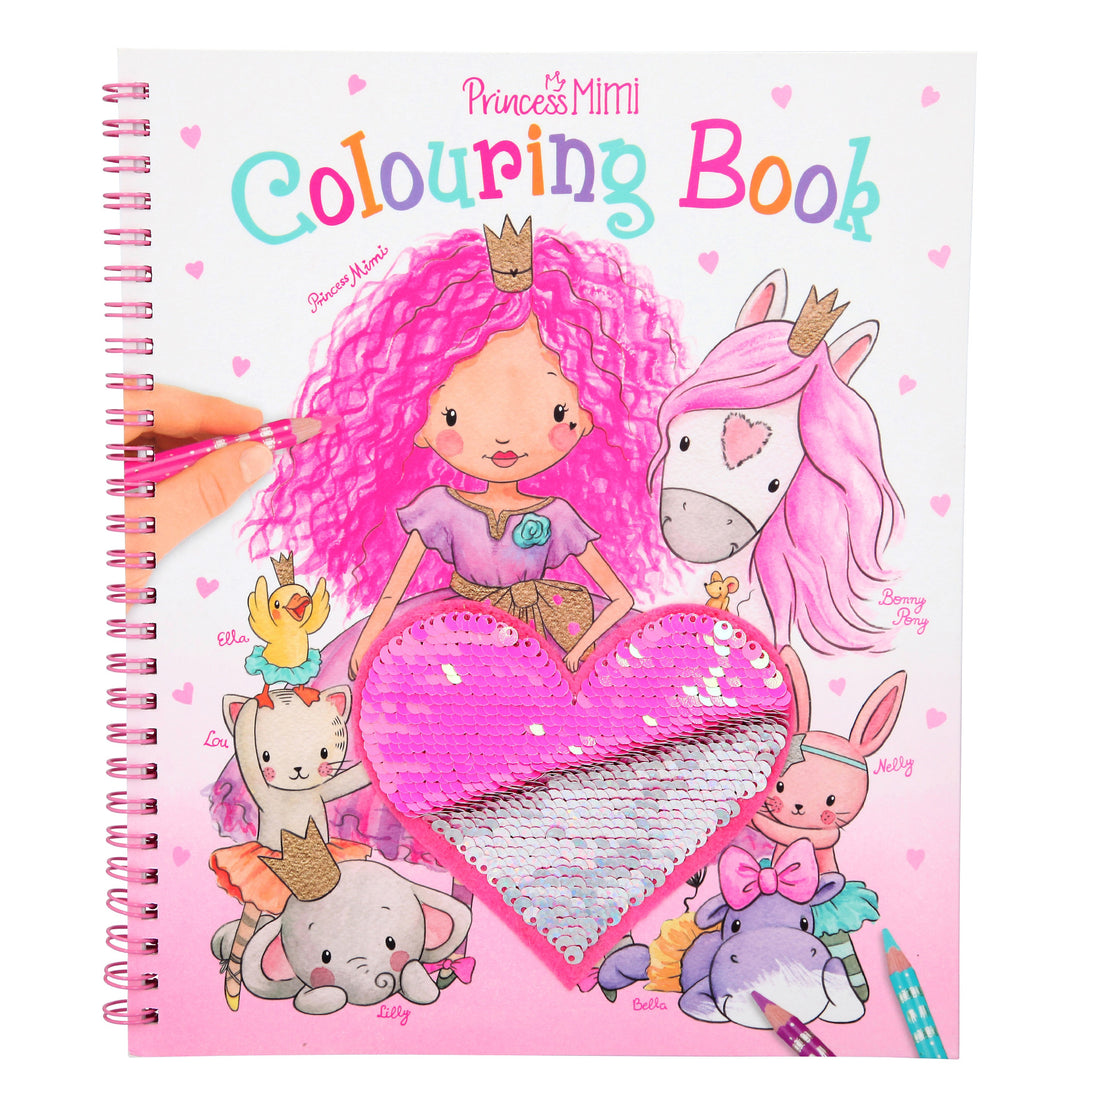 depesche-princess-mimi-colouring-book-with-sequins-pink-heart-animals- (5)